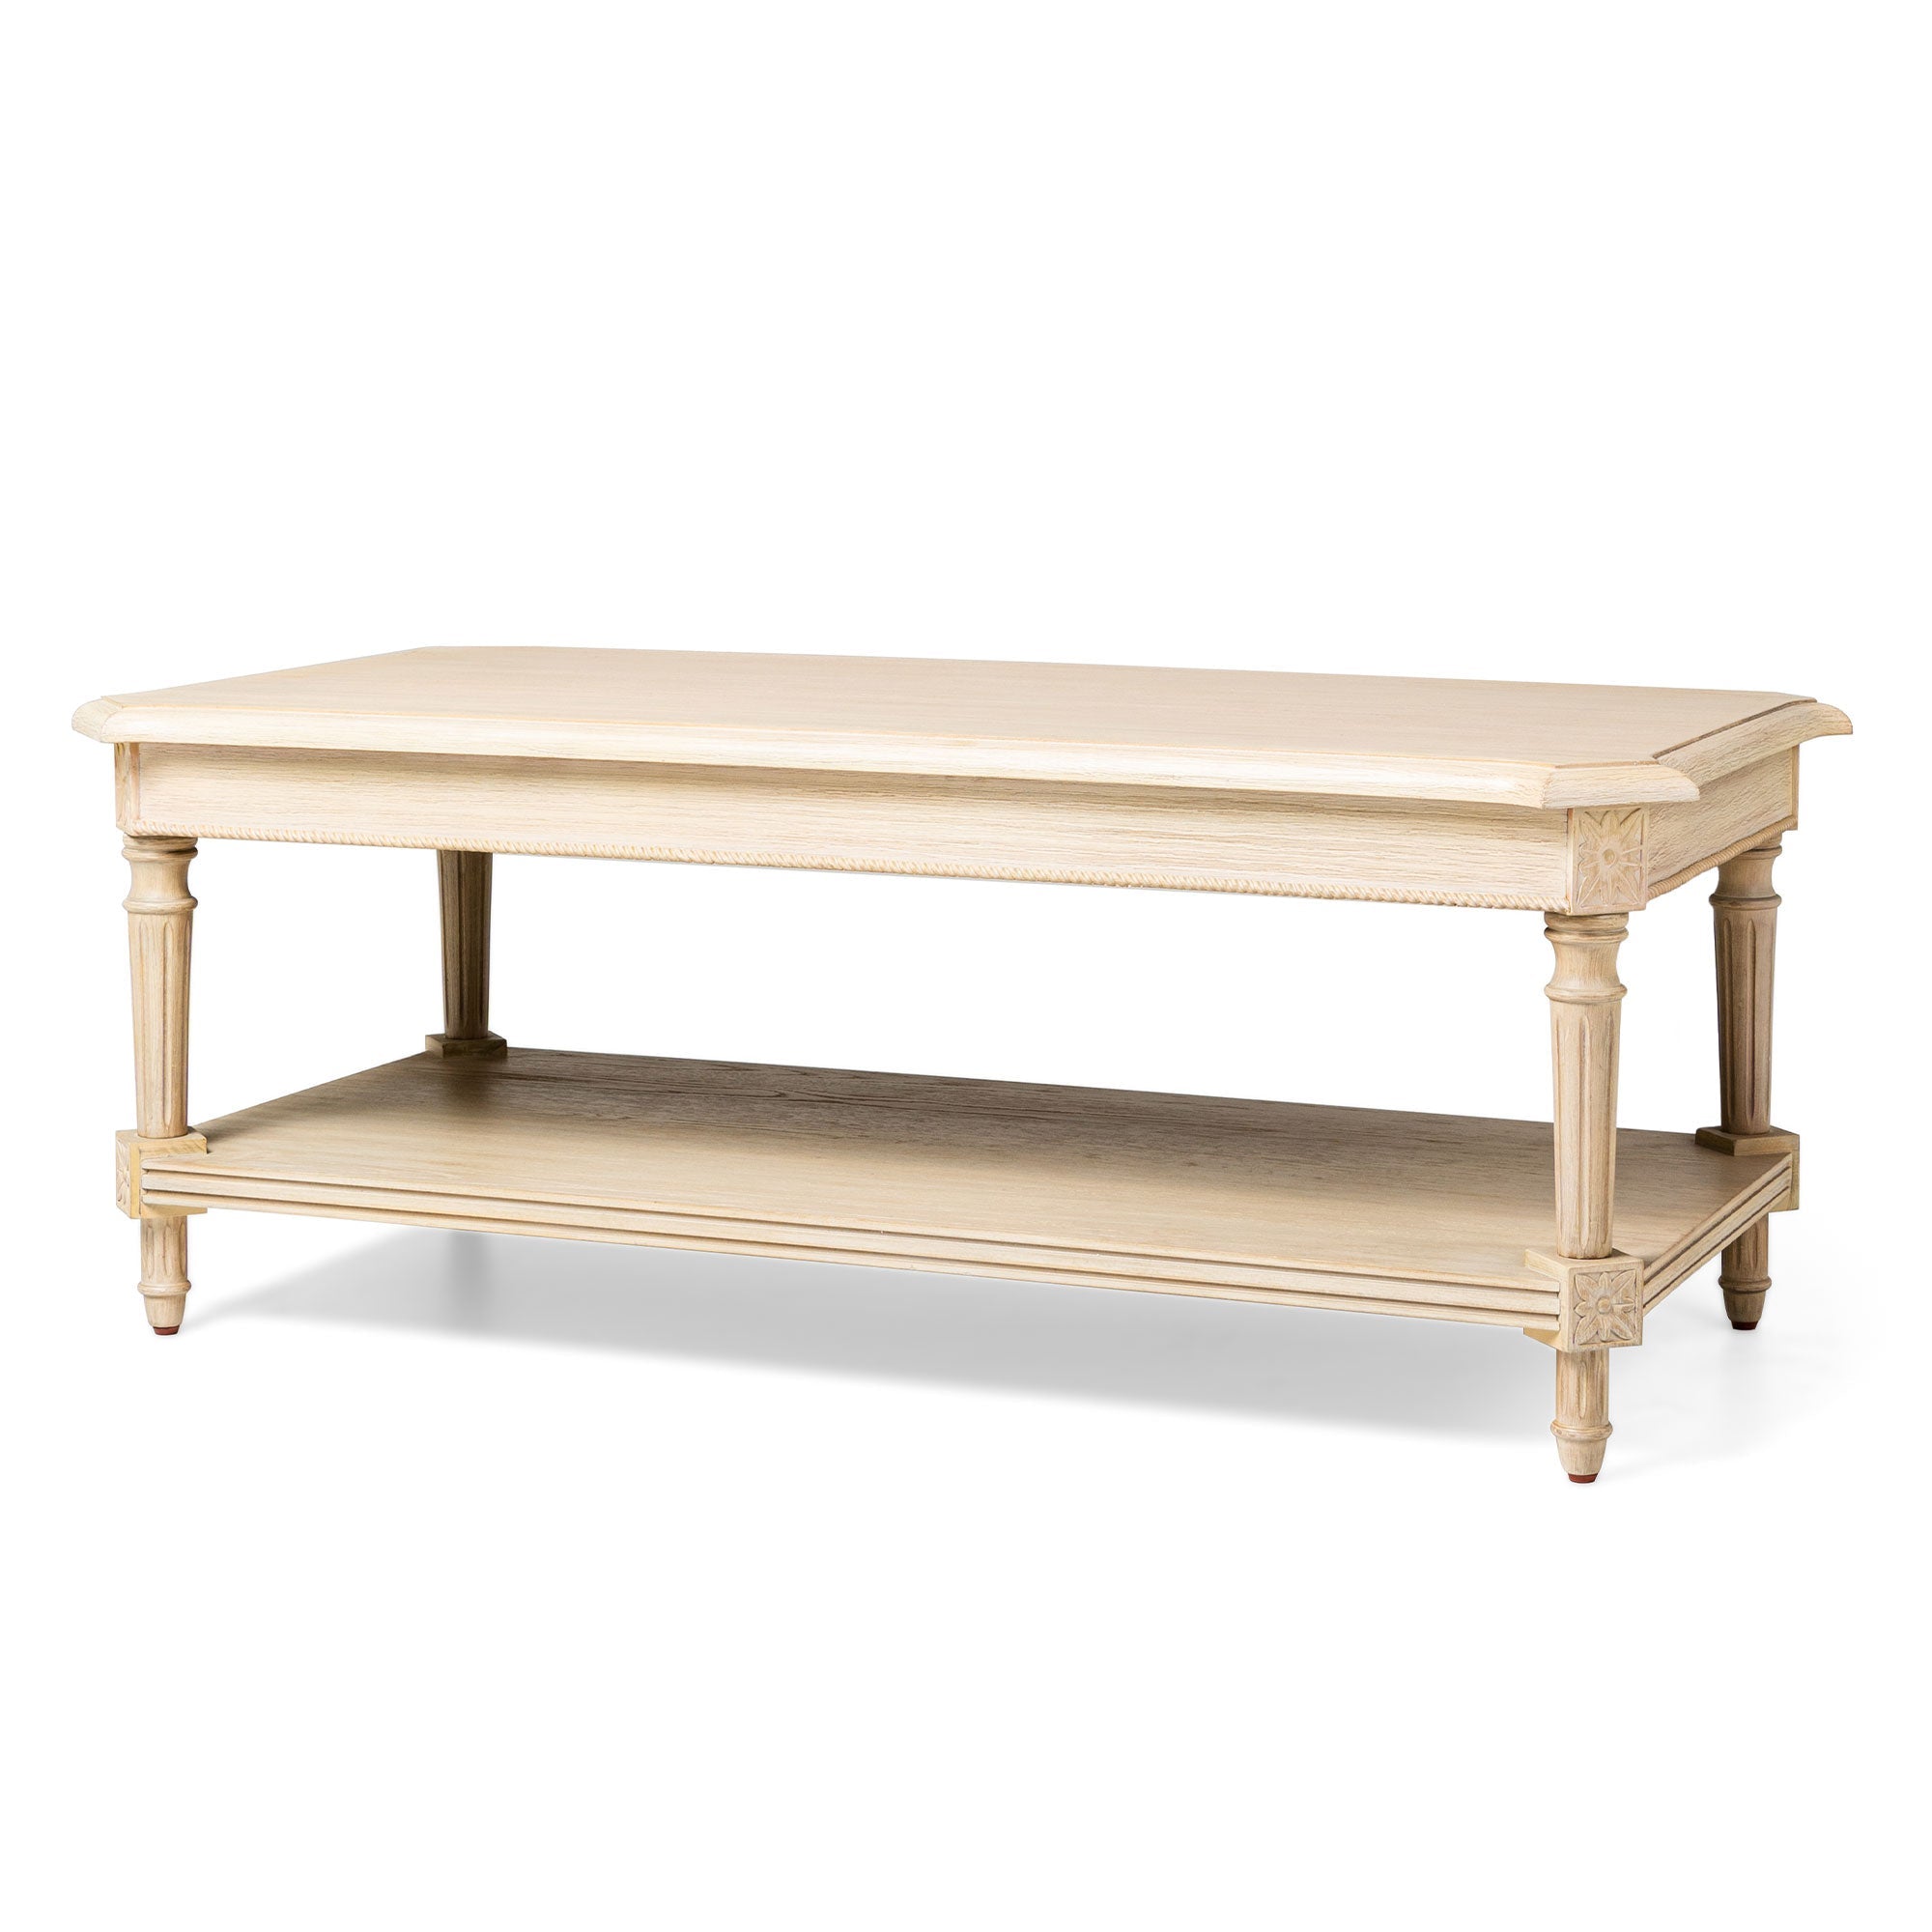 Pullman Traditional Rectangular Wooden Coffee Table in Antiqued White Finish in Accent Tables by Maven Lane